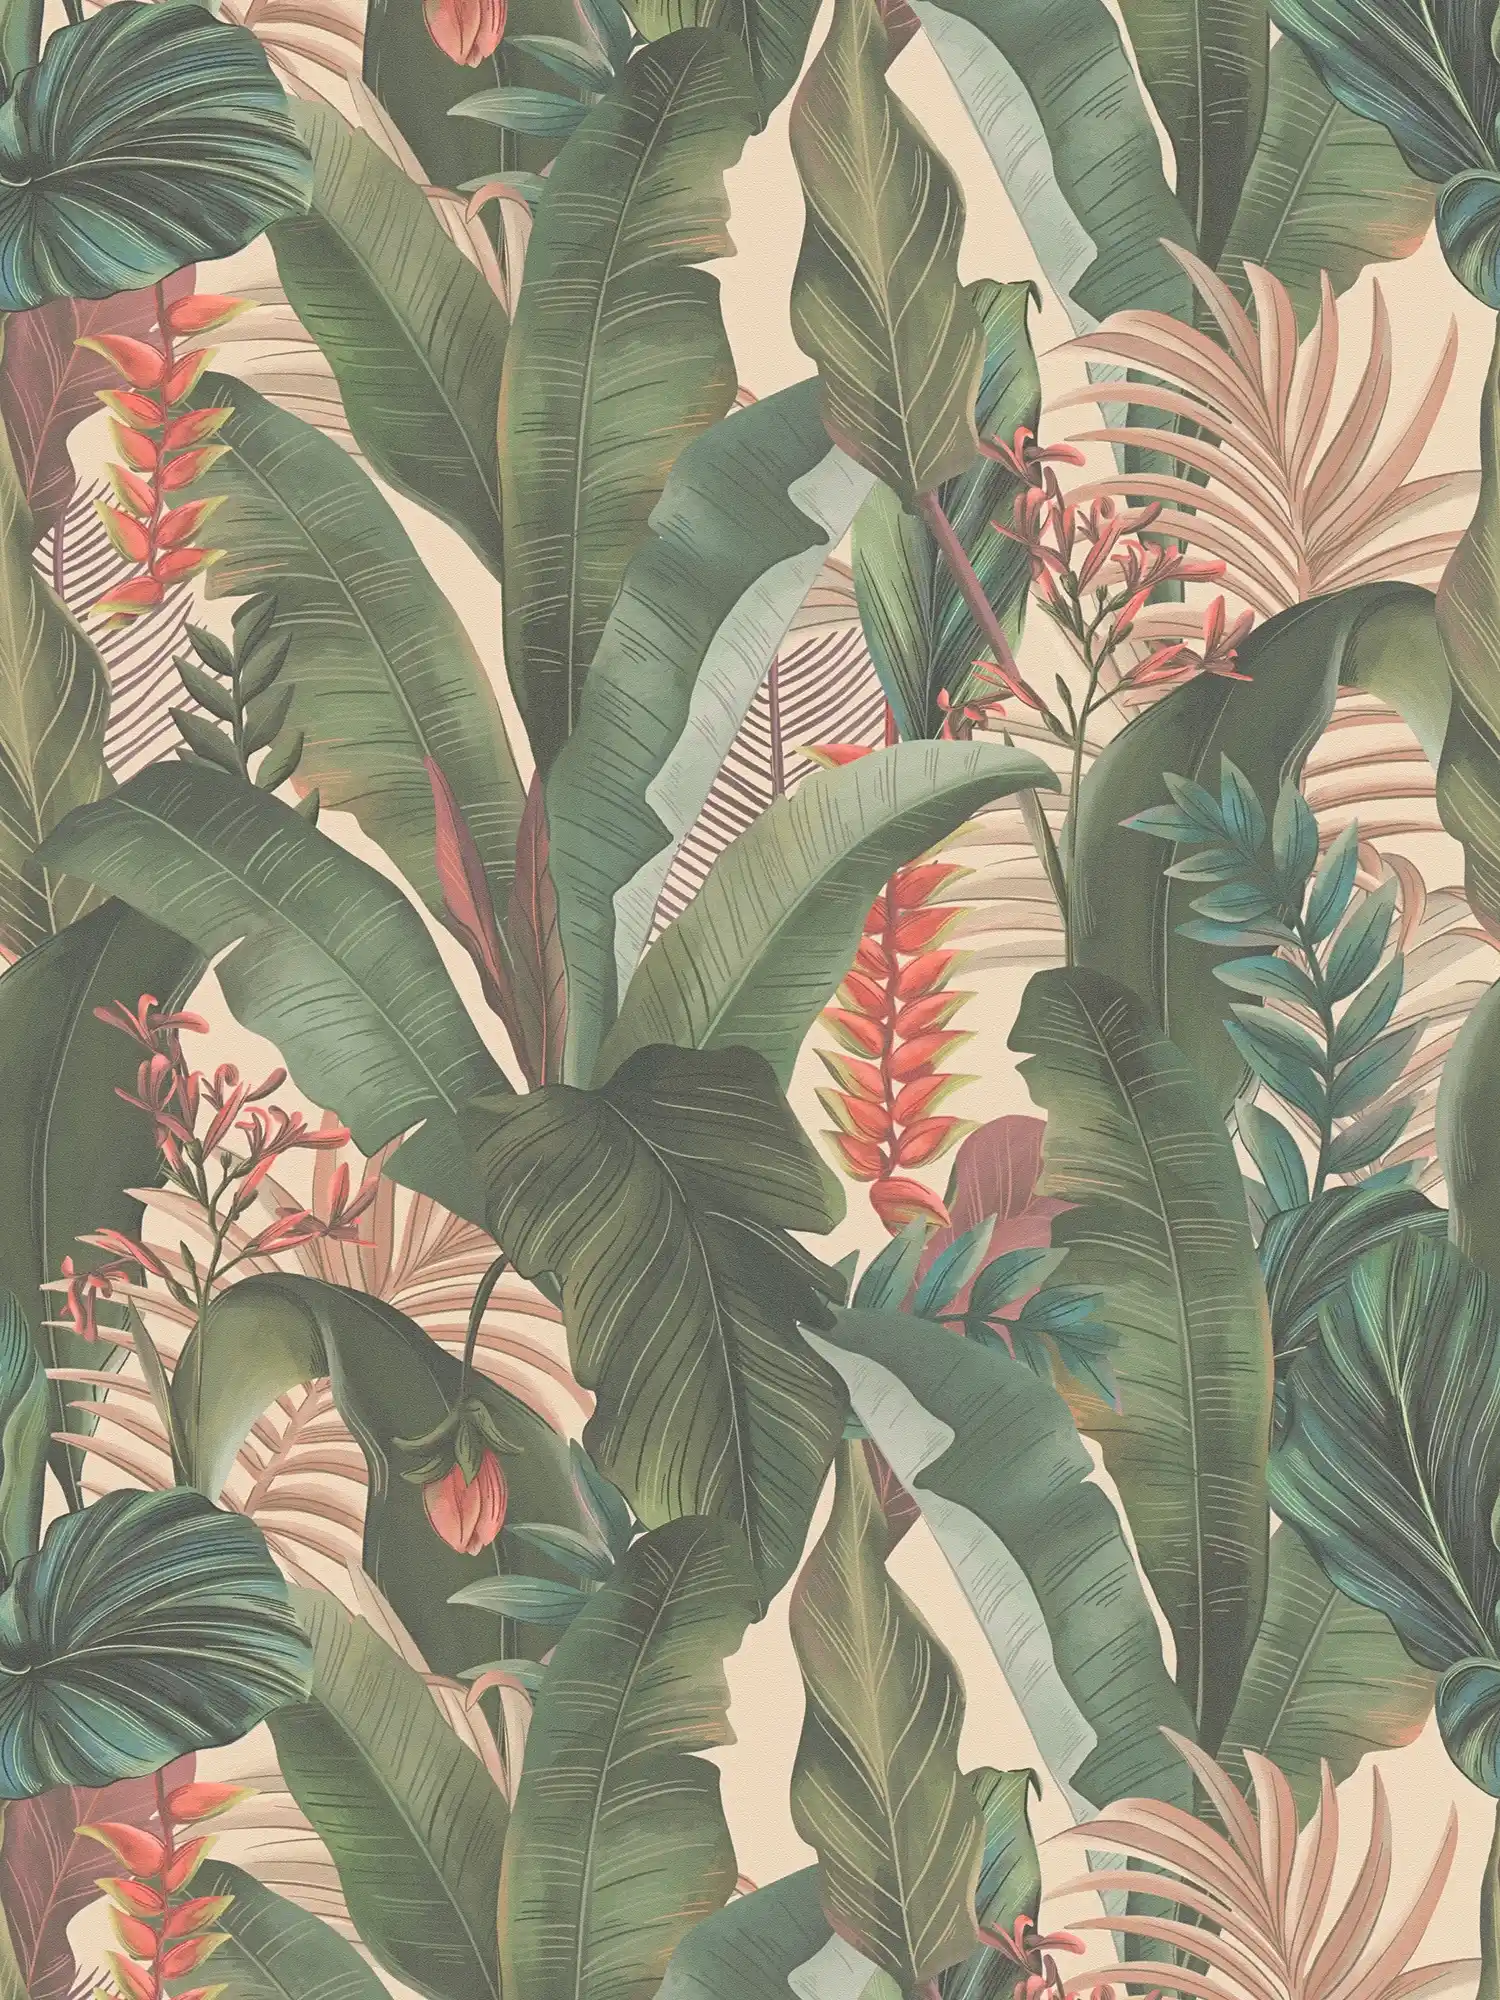 Jungle wallpaper with palm leaves & flowers in floral style textured matt - Beige, Green, Pink
